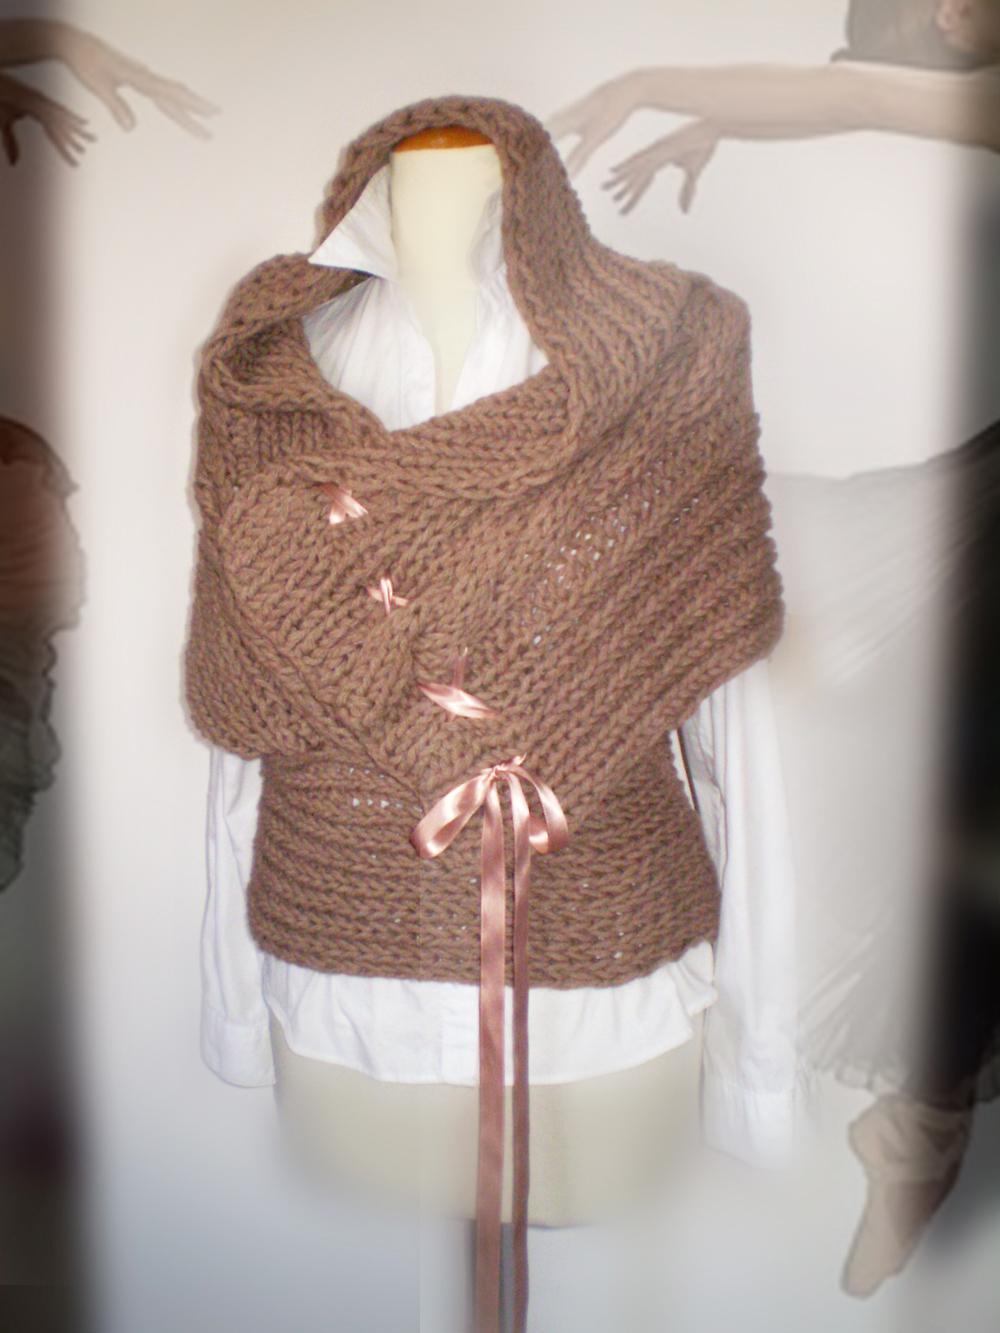 DIVNA'S SWEATERS: French beige sweater or shrug Cable knitting and unique